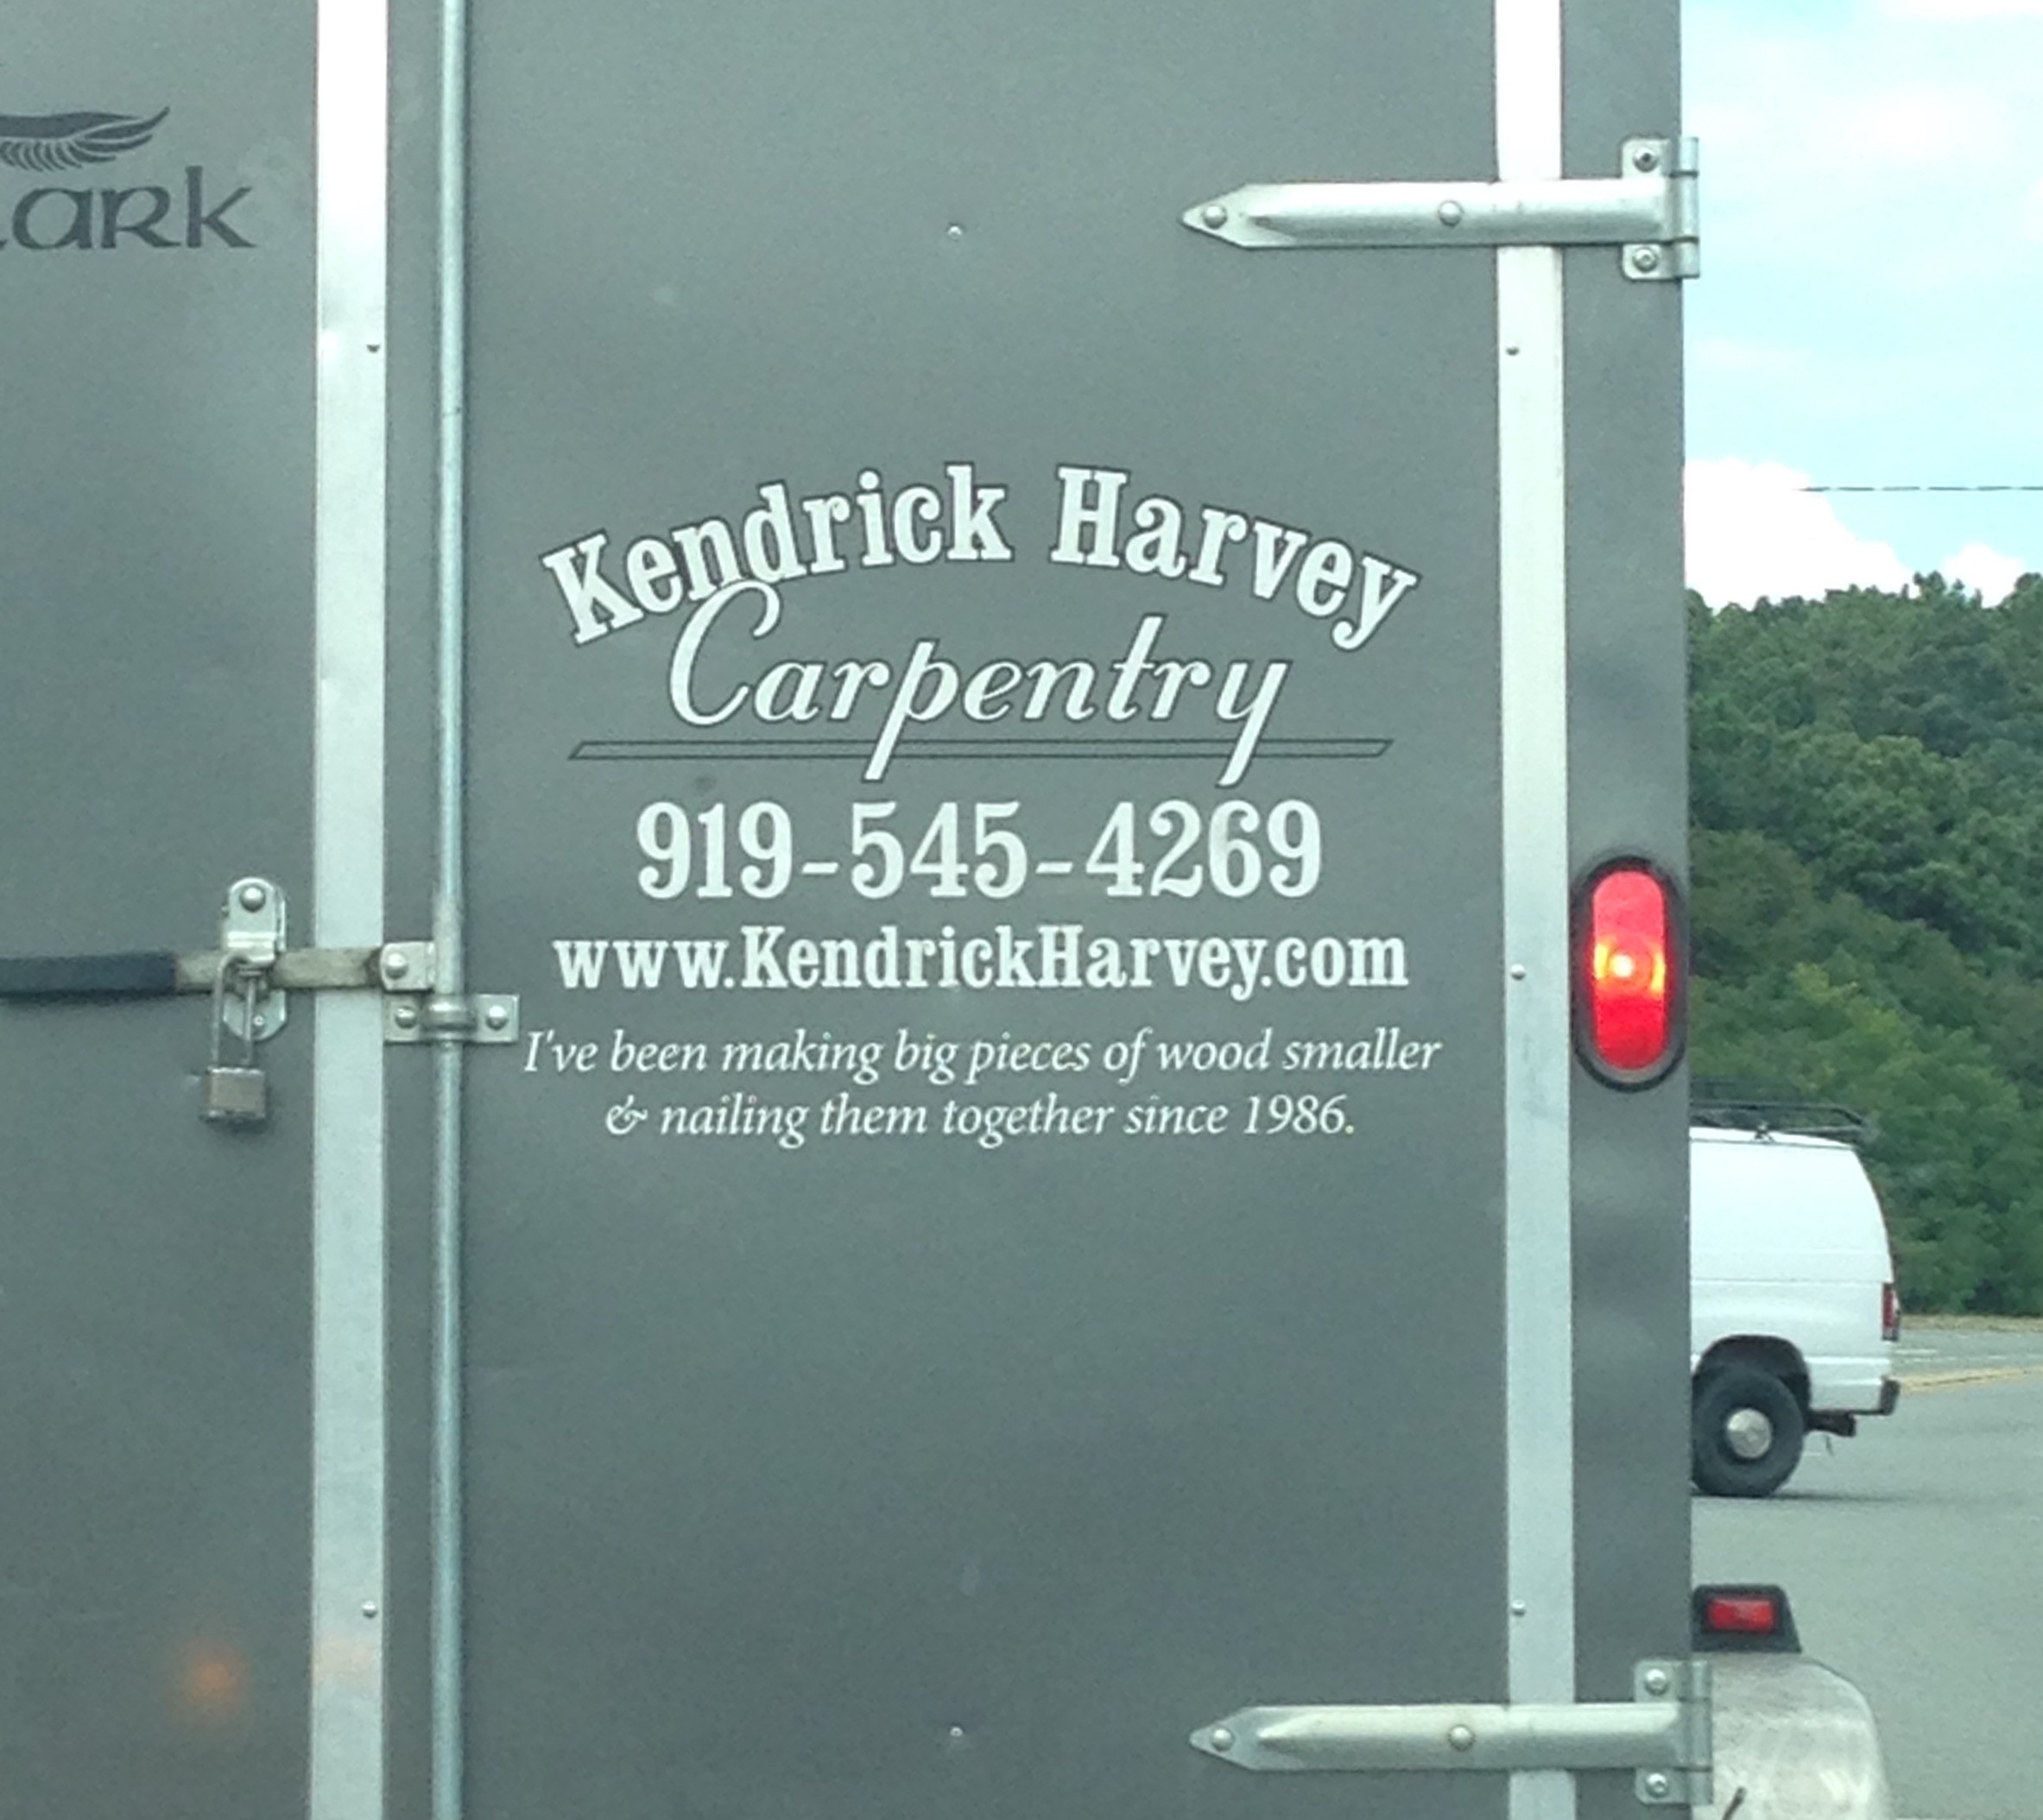 i've been making big pieces of wood smaller and nailing them together since 1986, kendrick harvey carpentry, company text on truck